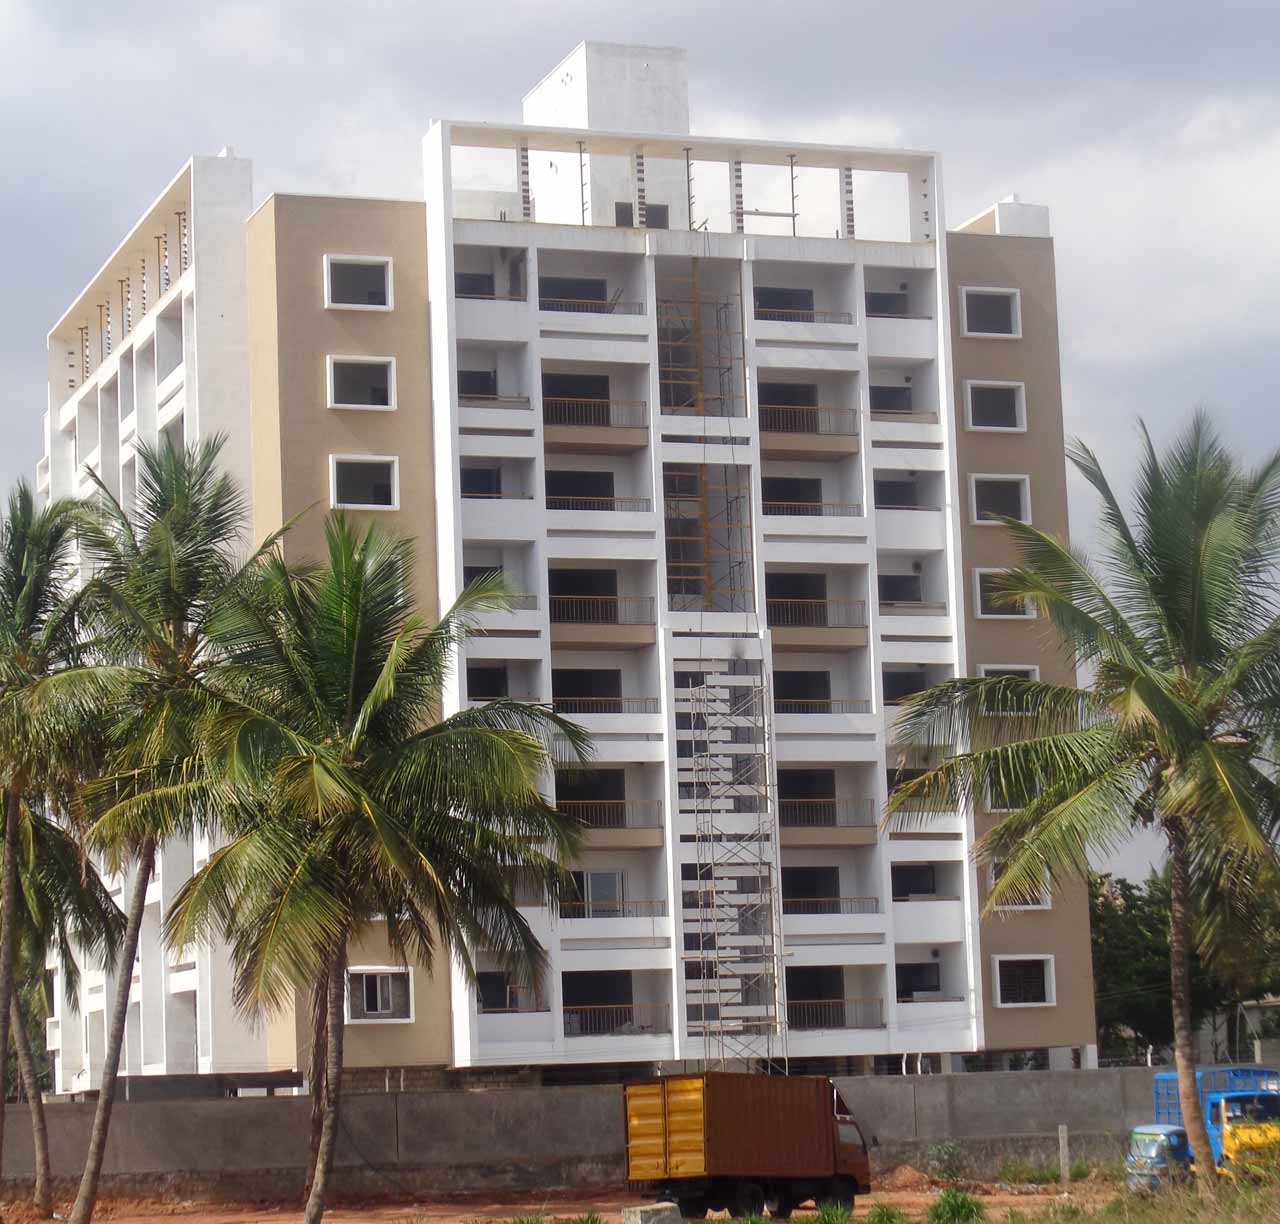 Divyasree Serene Nest comprises 72 apartments -cozy, compact and just perfect for you